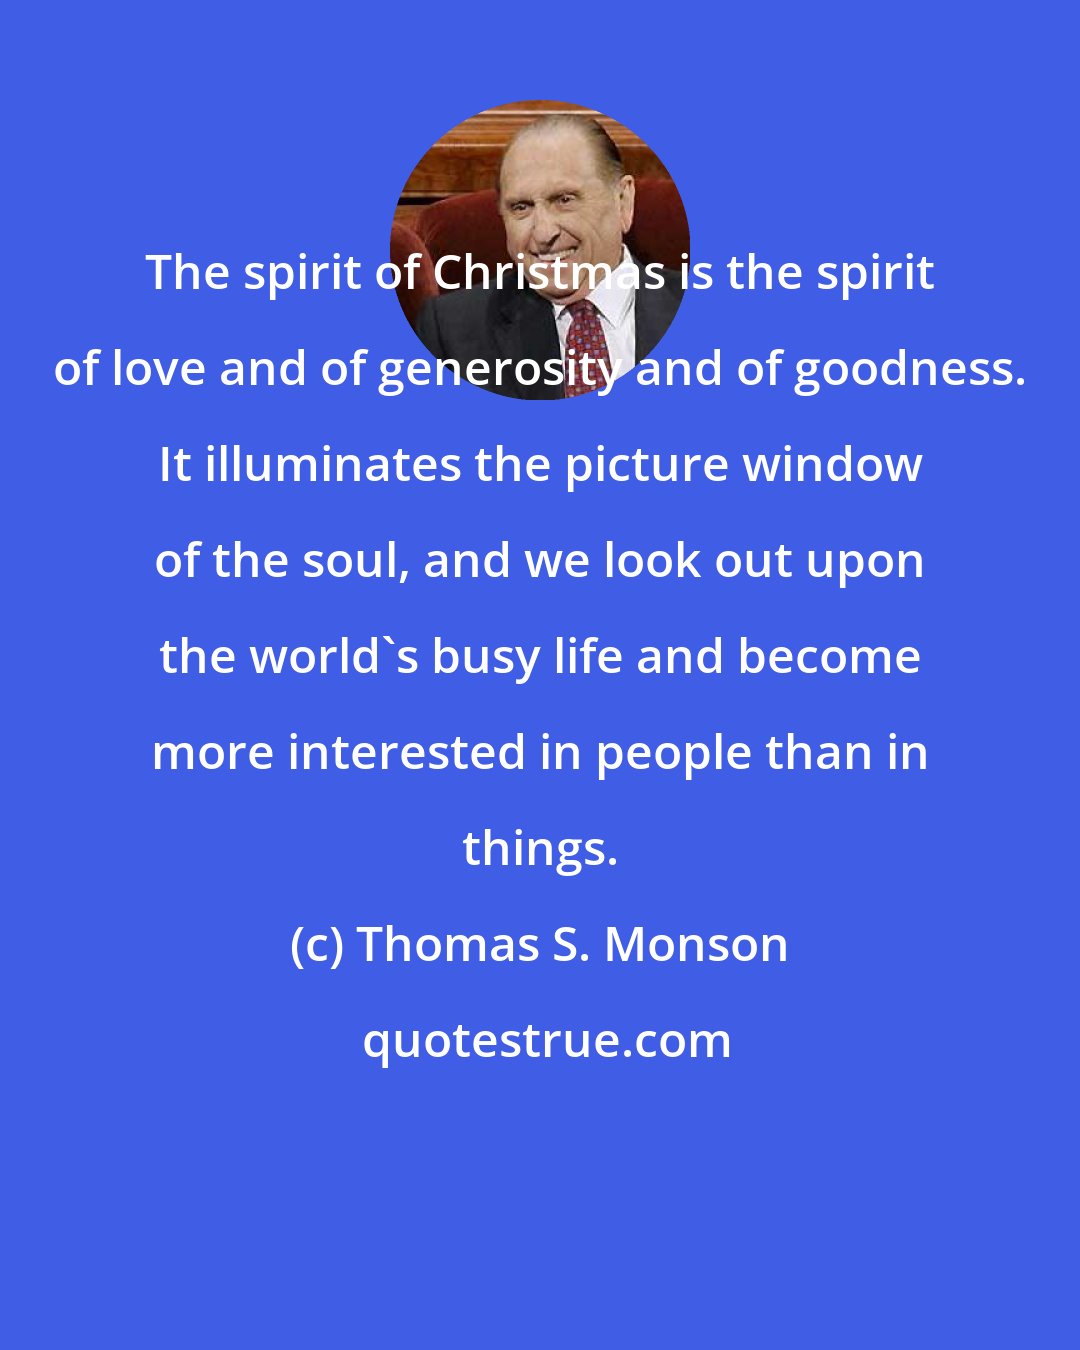 Thomas S. Monson: The spirit of Christmas is the spirit of love and of generosity and of goodness. It illuminates the picture window of the soul, and we look out upon the world's busy life and become more interested in people than in things.